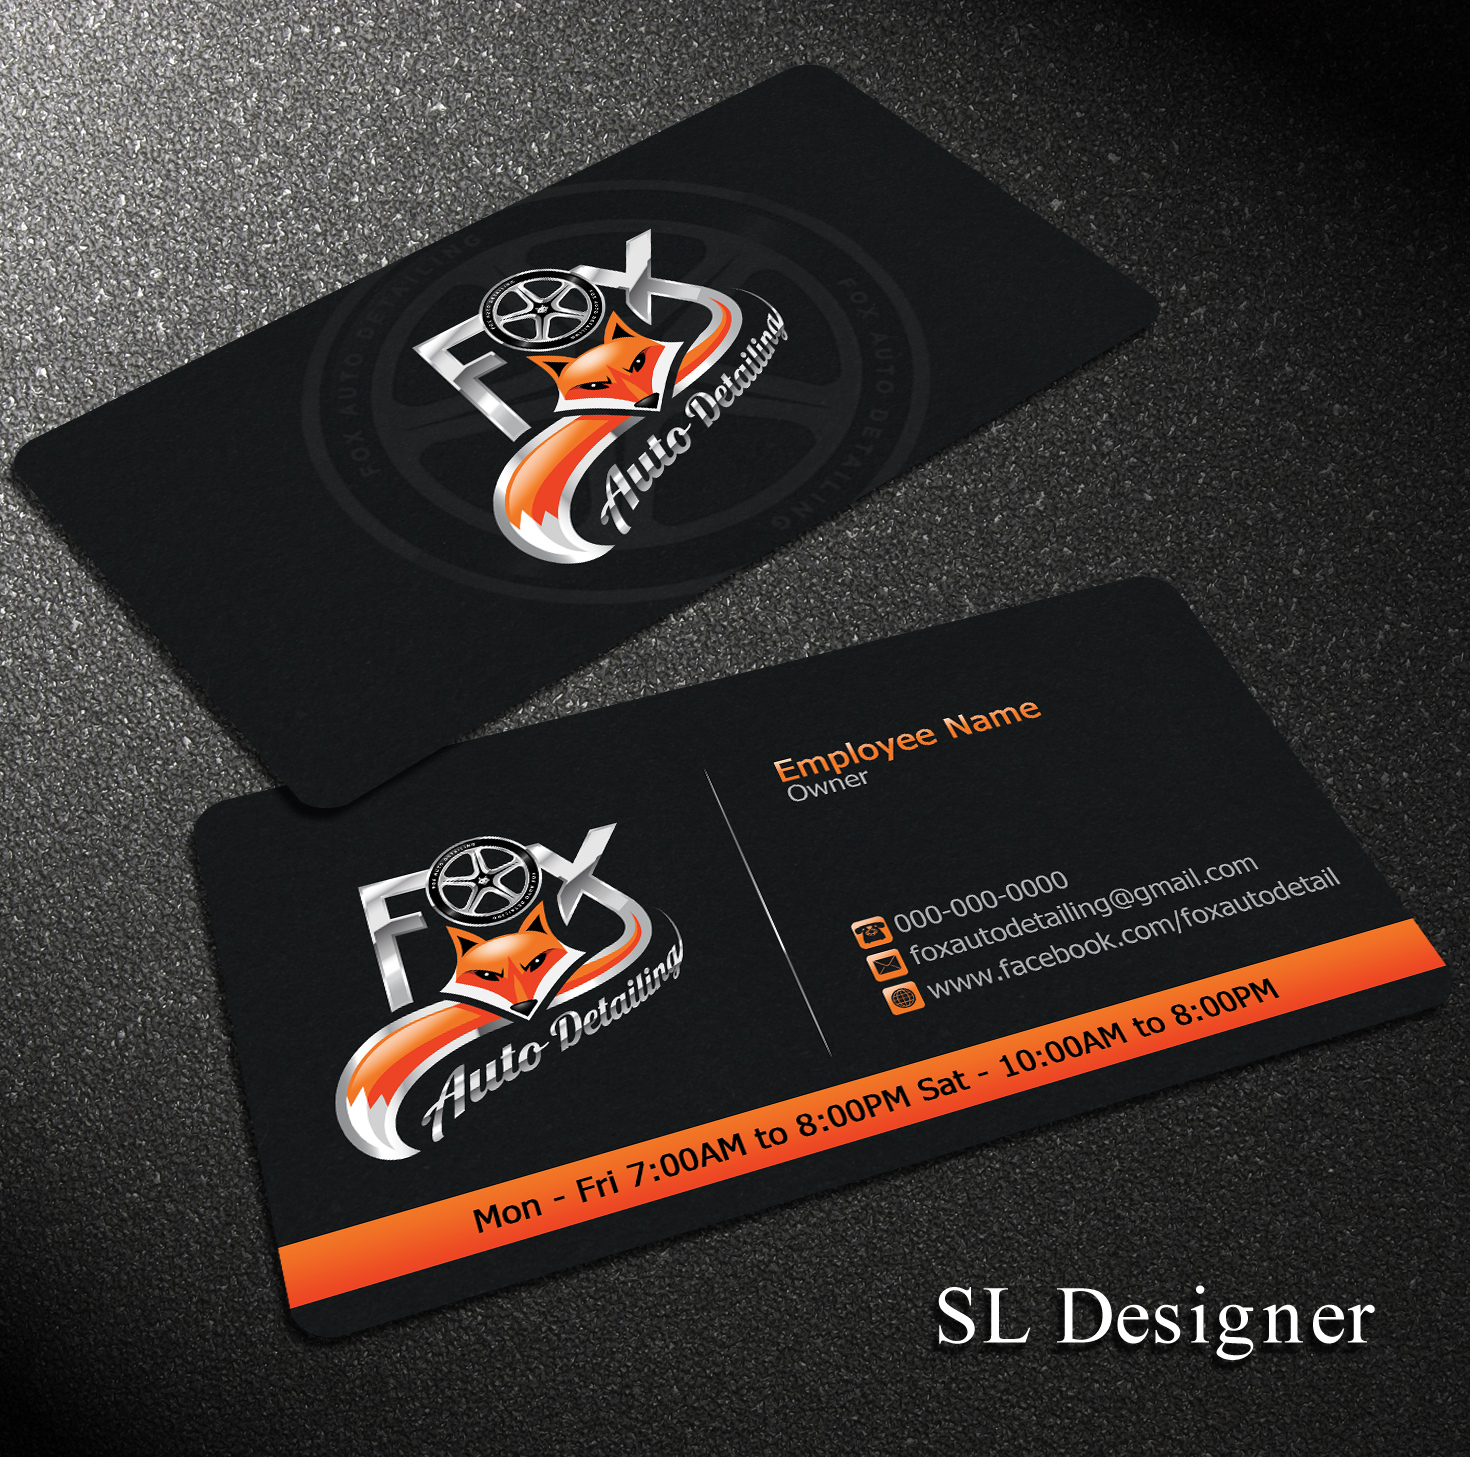 mobile detail business cards 2